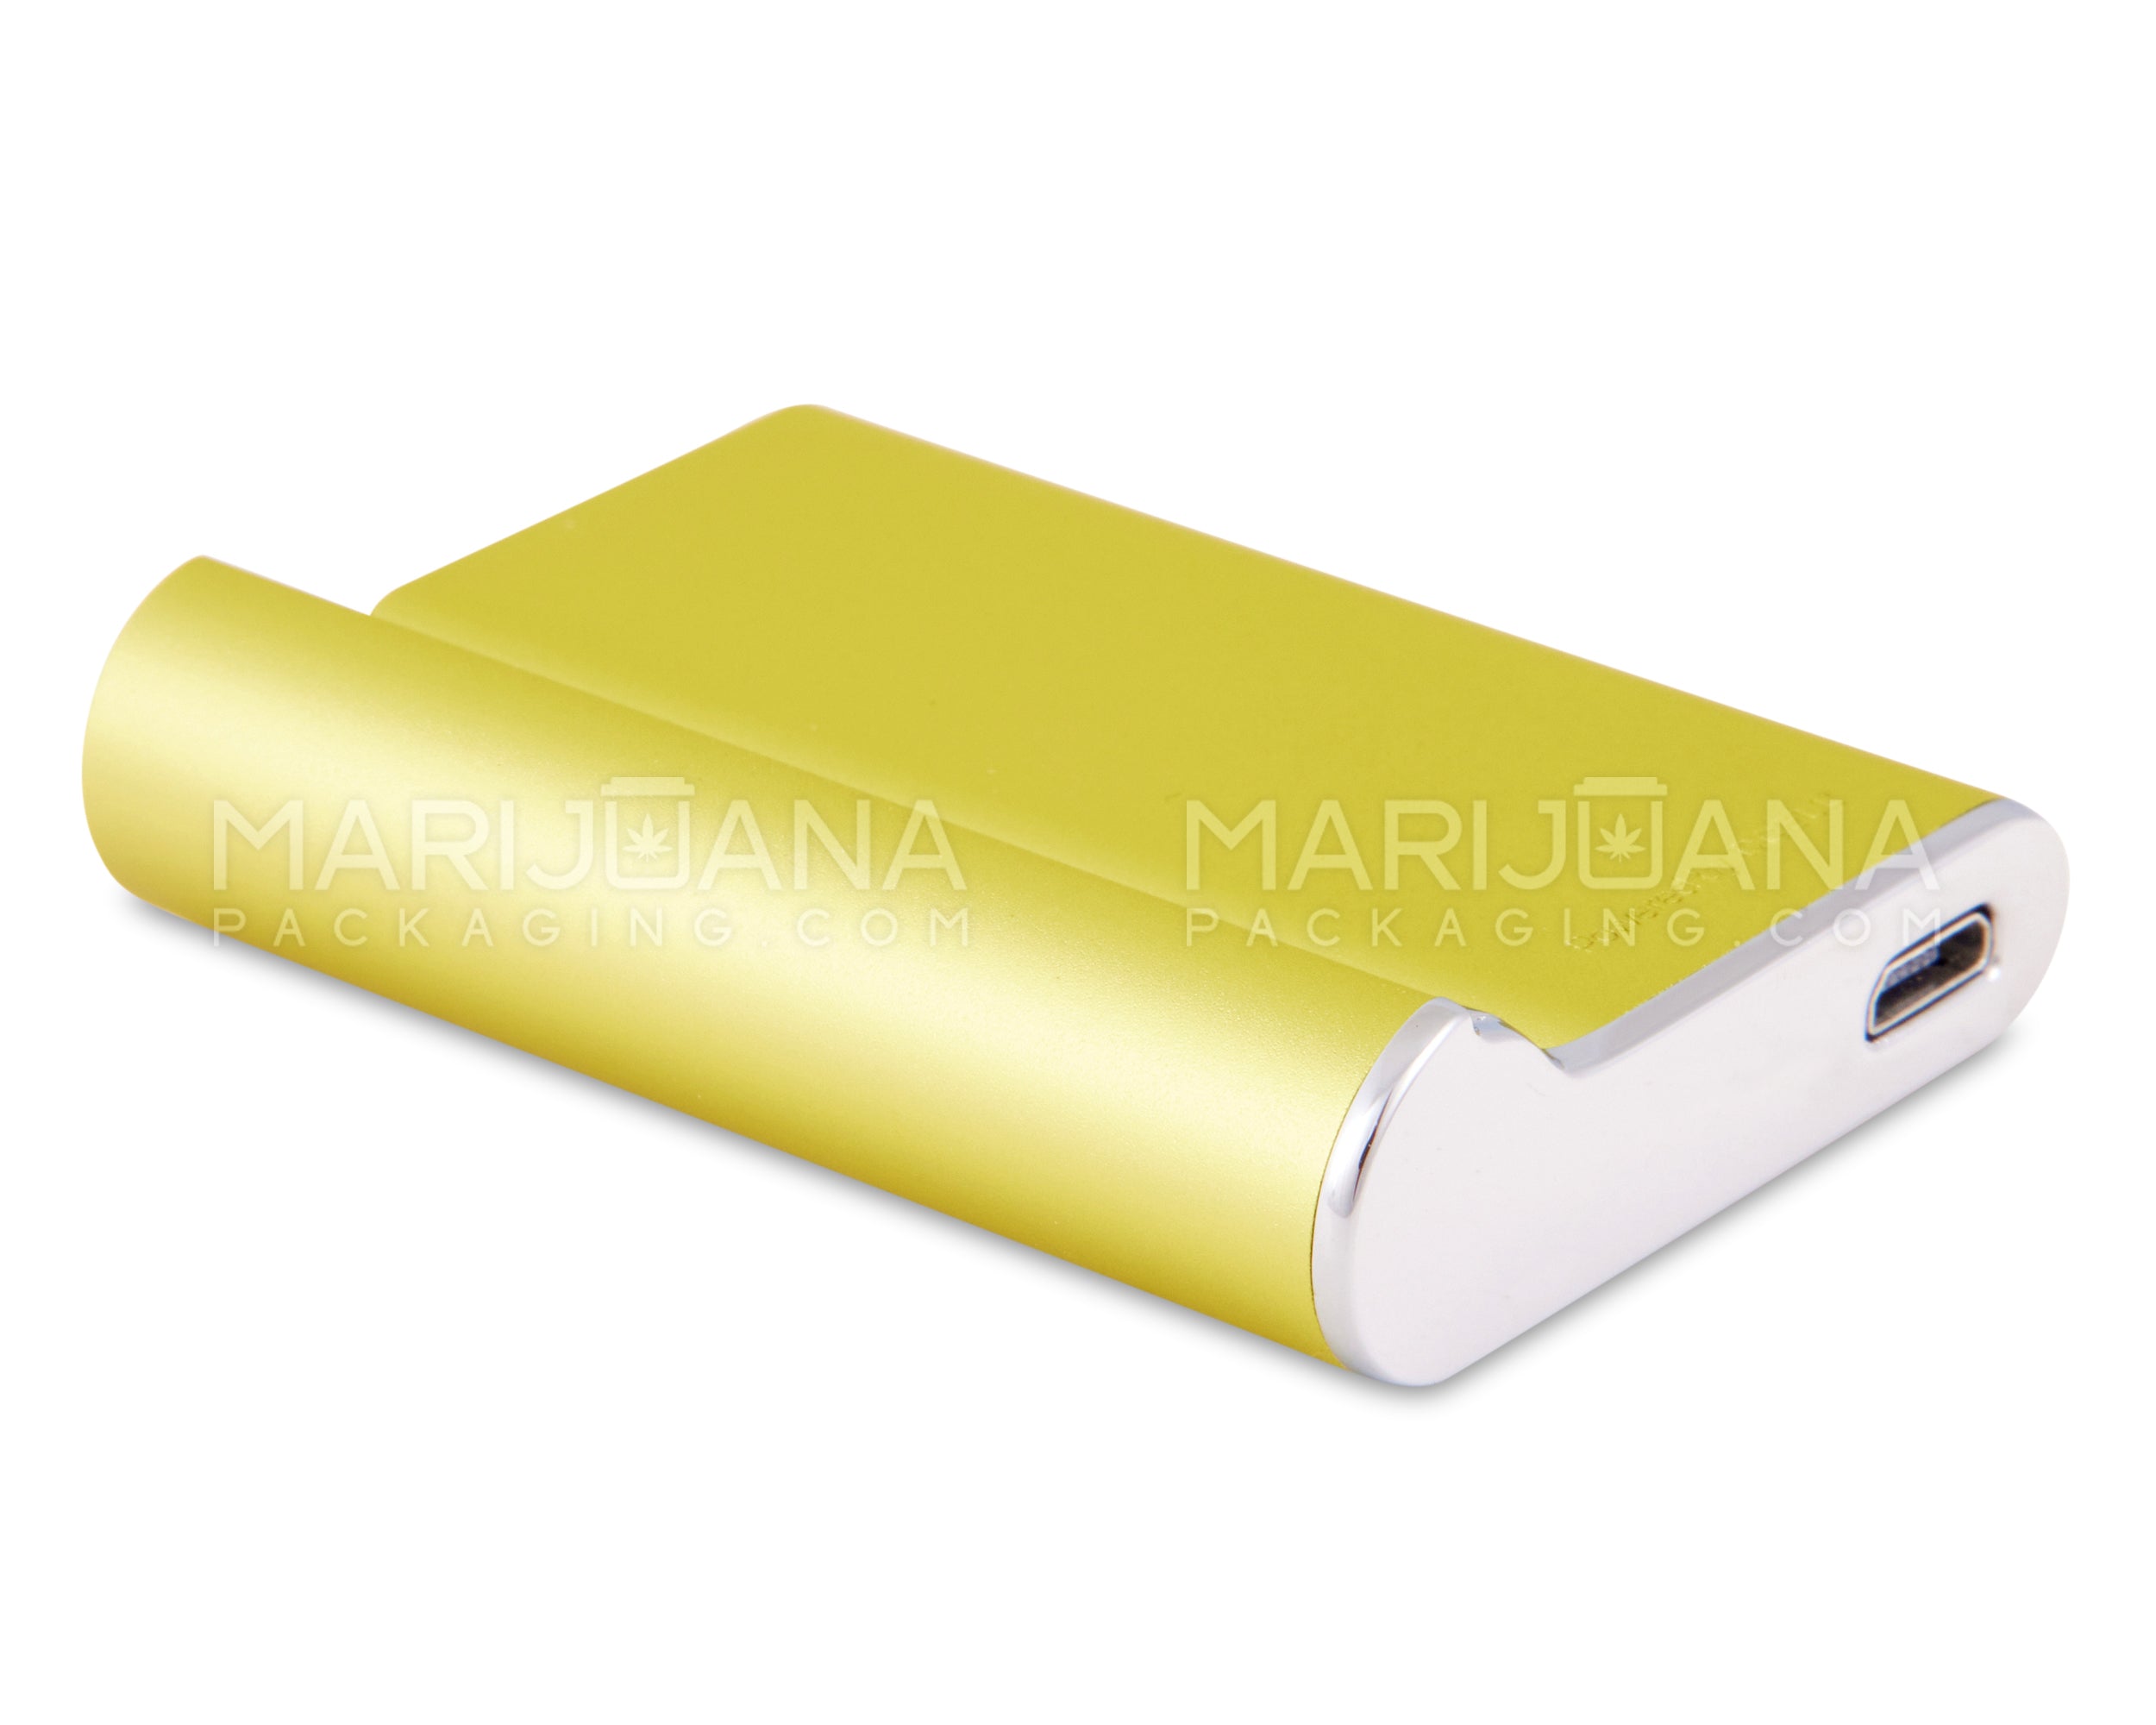 CCELL | Palm Vape Battery with USB Charger | 500mAh - Electric Yellow - 510 Thread - 3